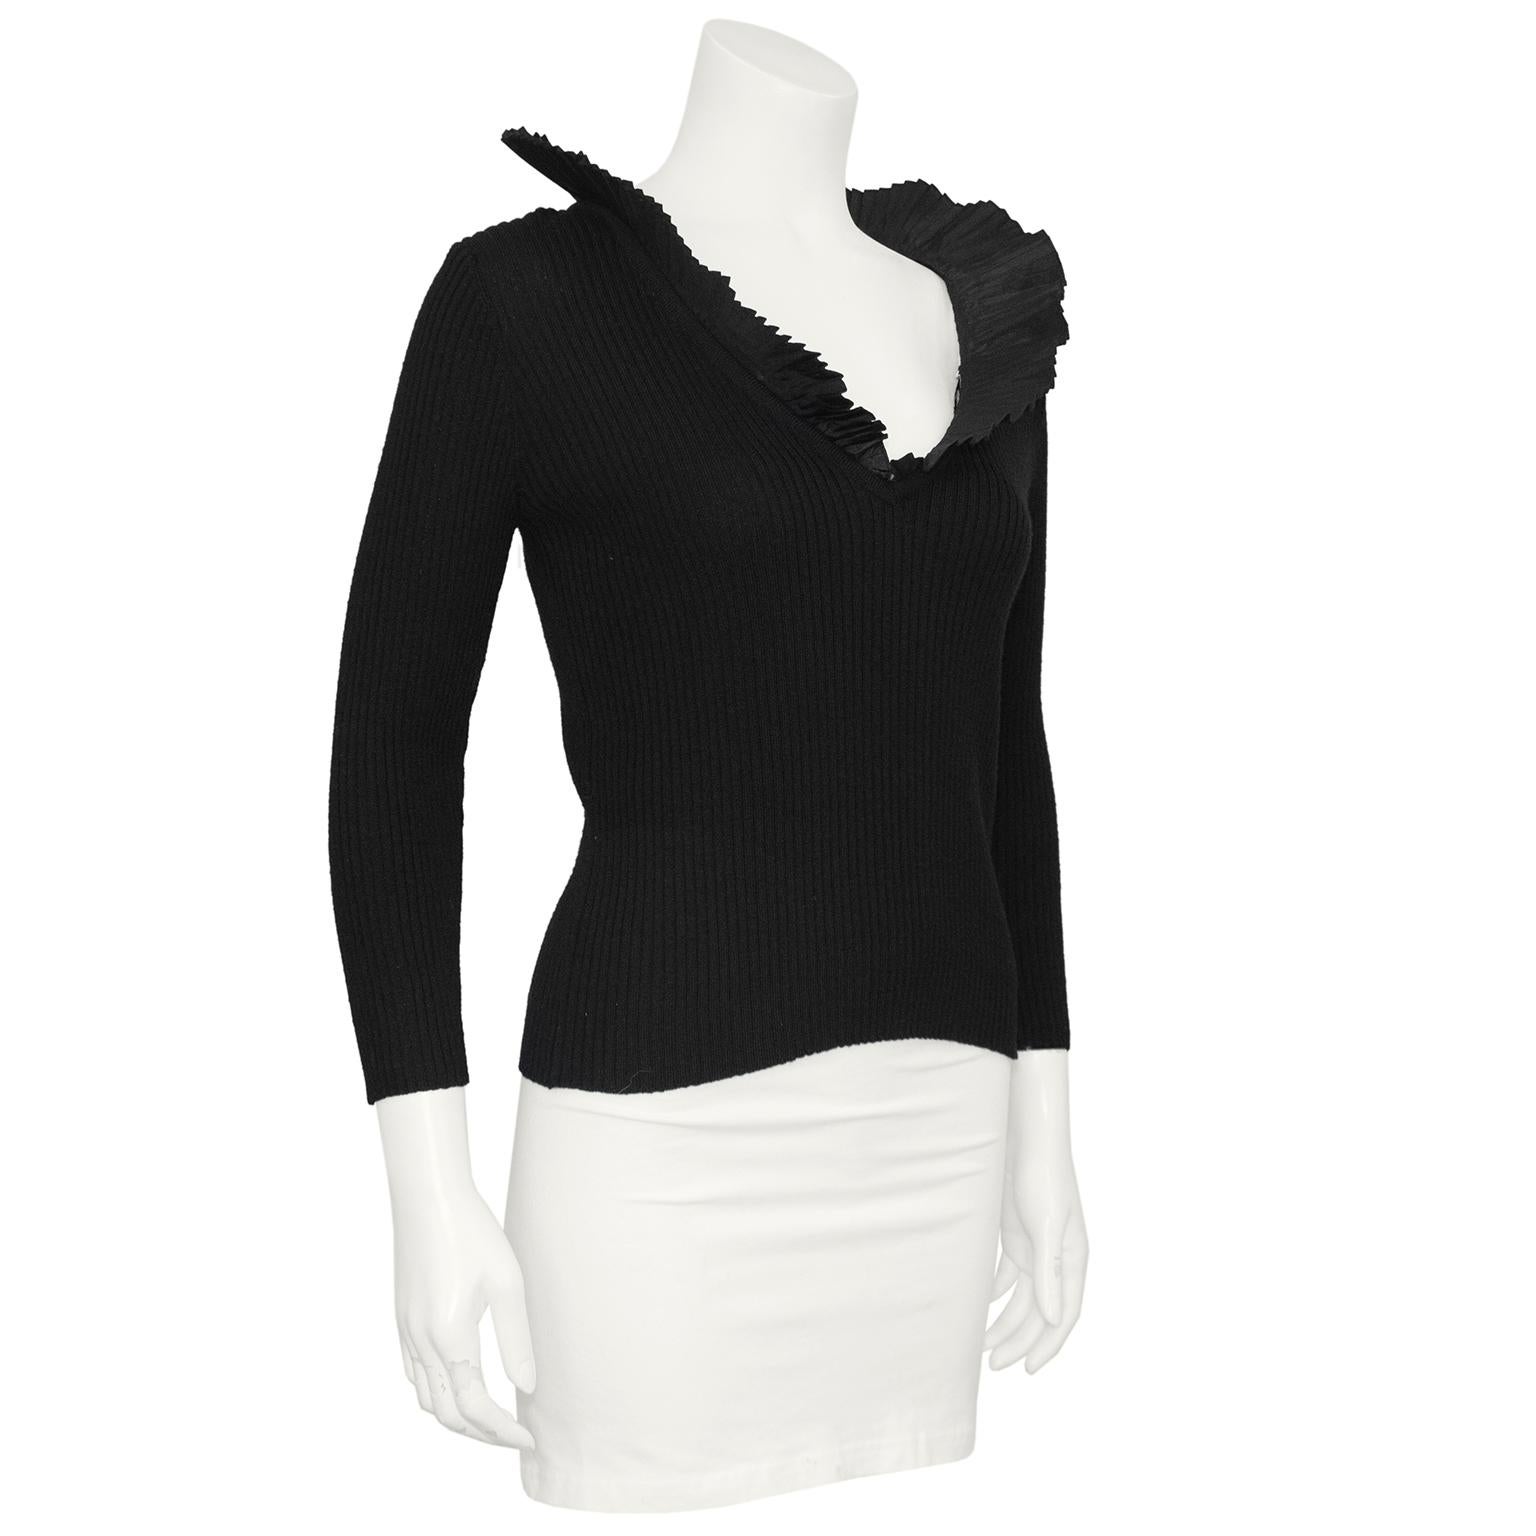 Classic, with a twist Oscar de la Renta sweater from the 1990s. Black and ribbed, this sweater is made from 100% fine Italian wool. The show stopping element of this piece is the dramatic micro pleated ruffle collar with a v neckline. Pair with